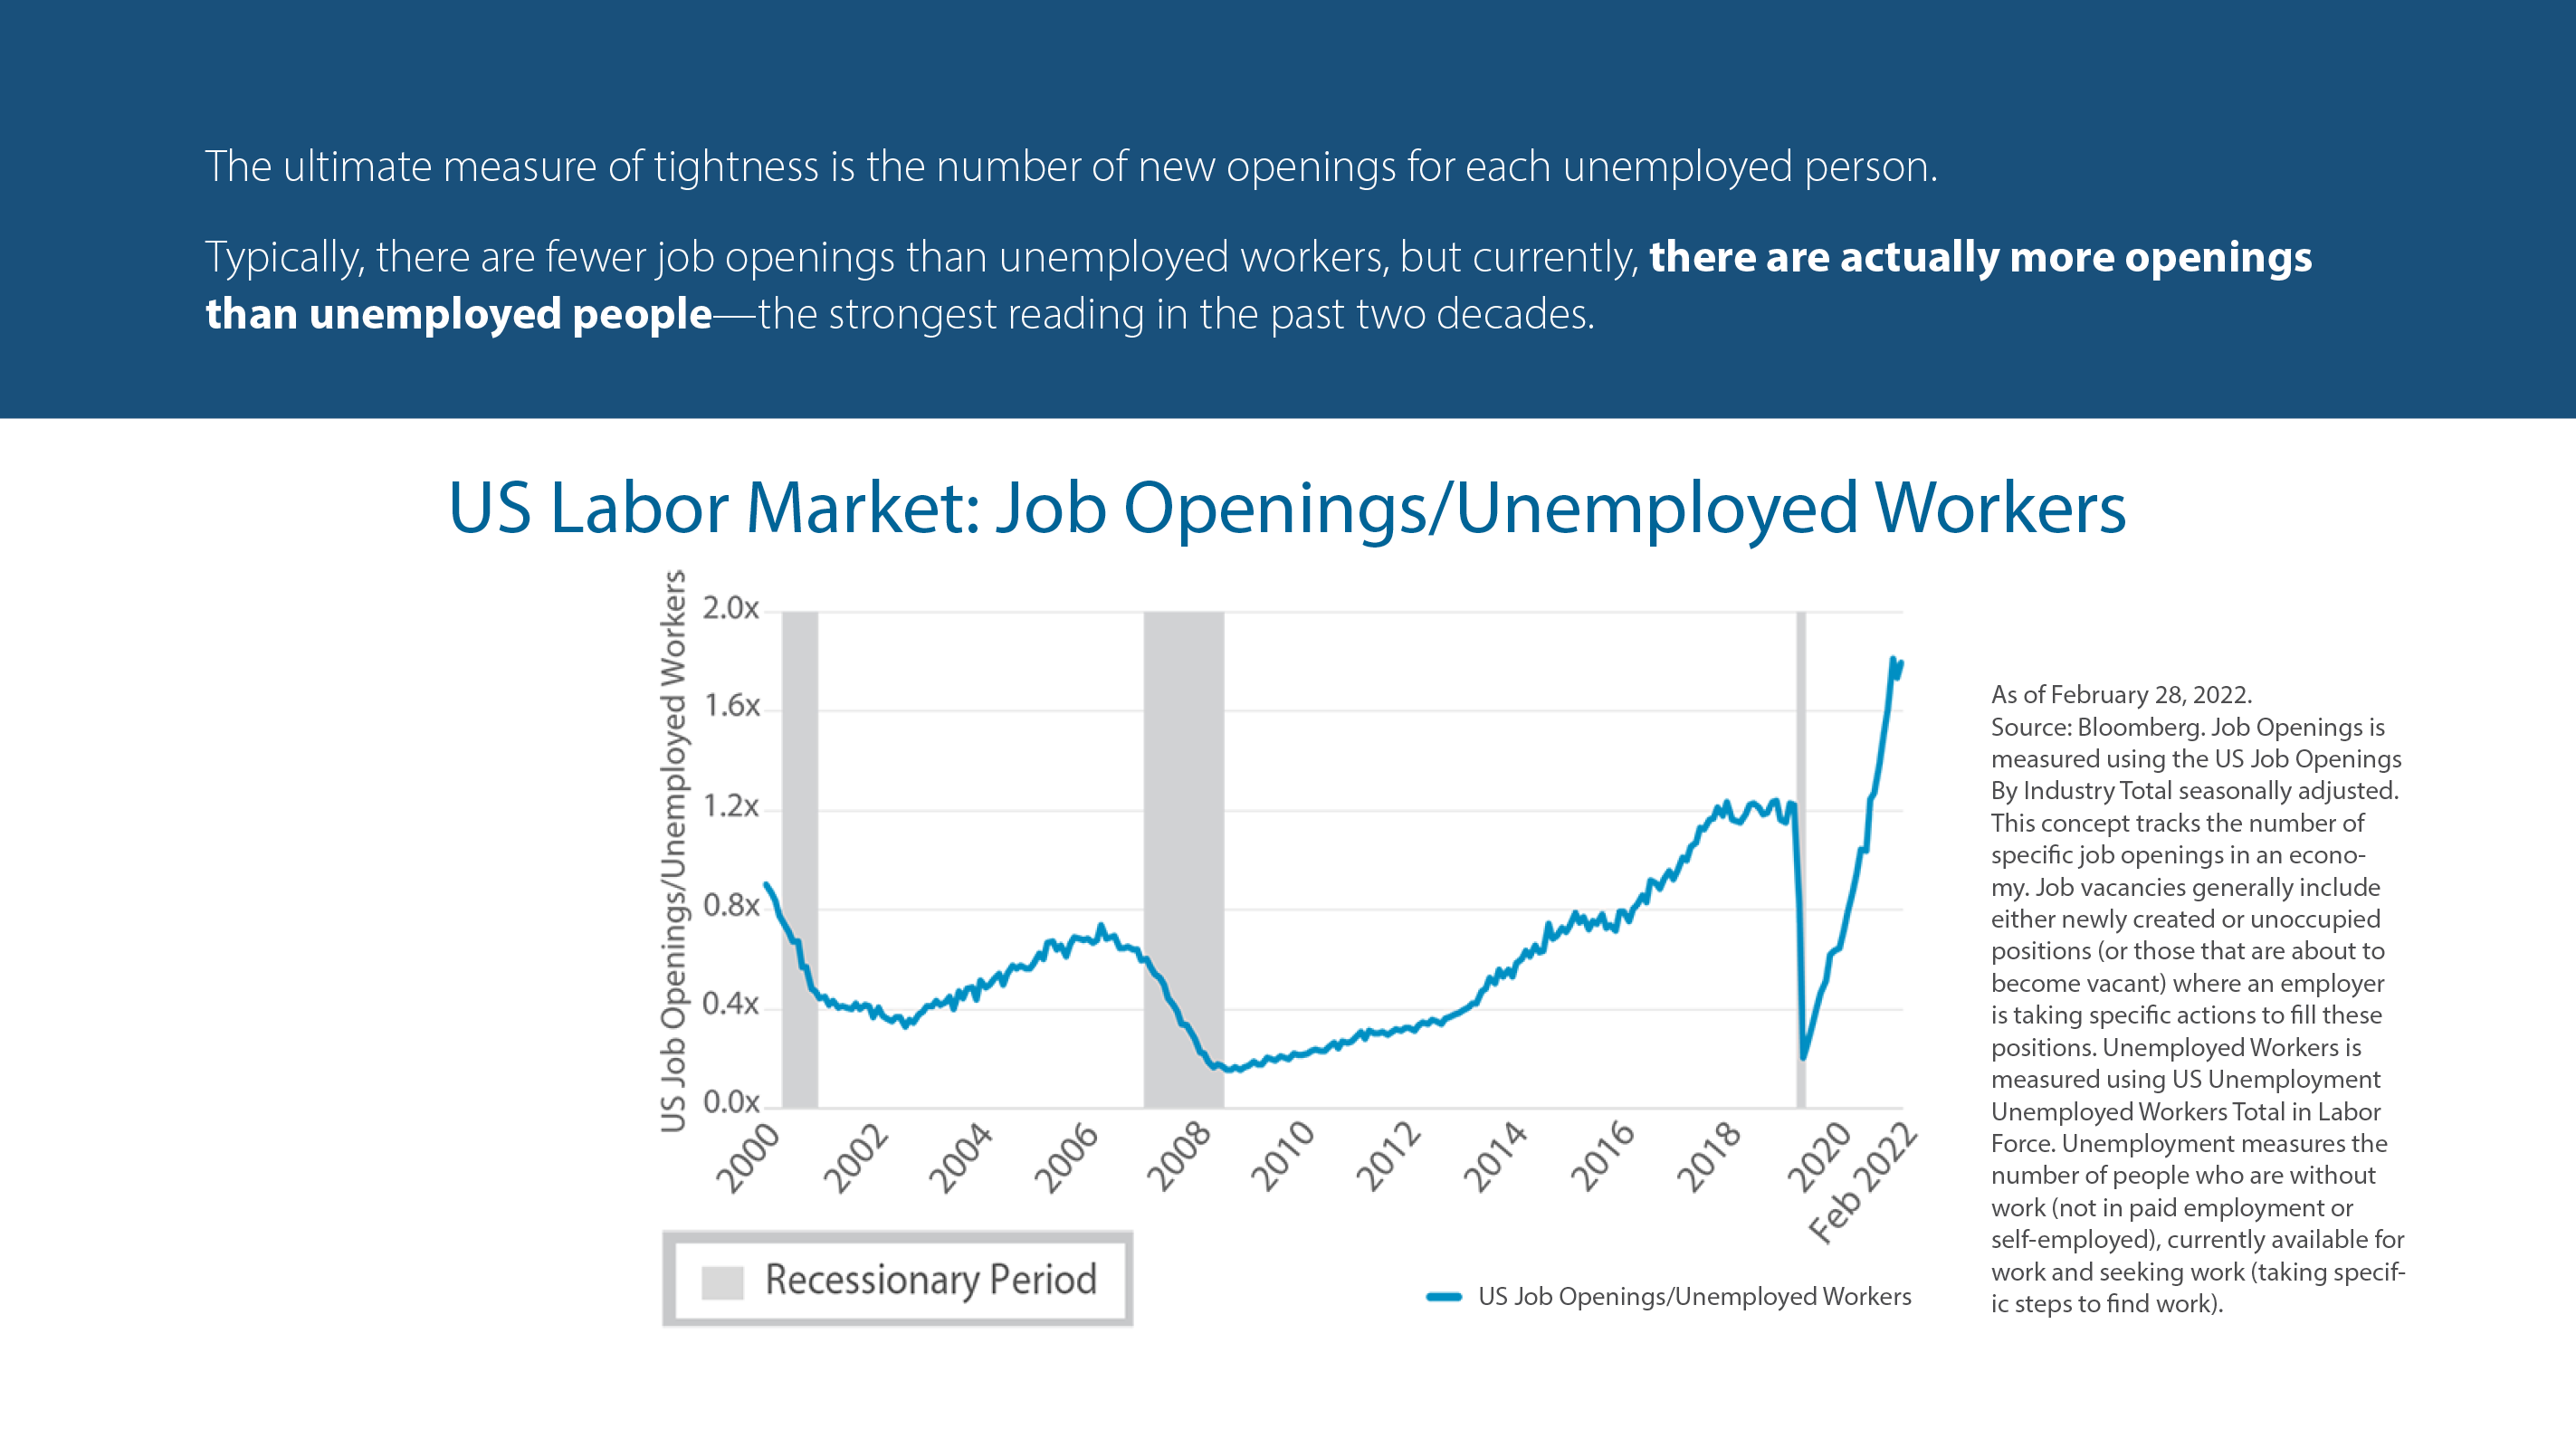 US Labor Market: Job Openings/Unemployed Workers